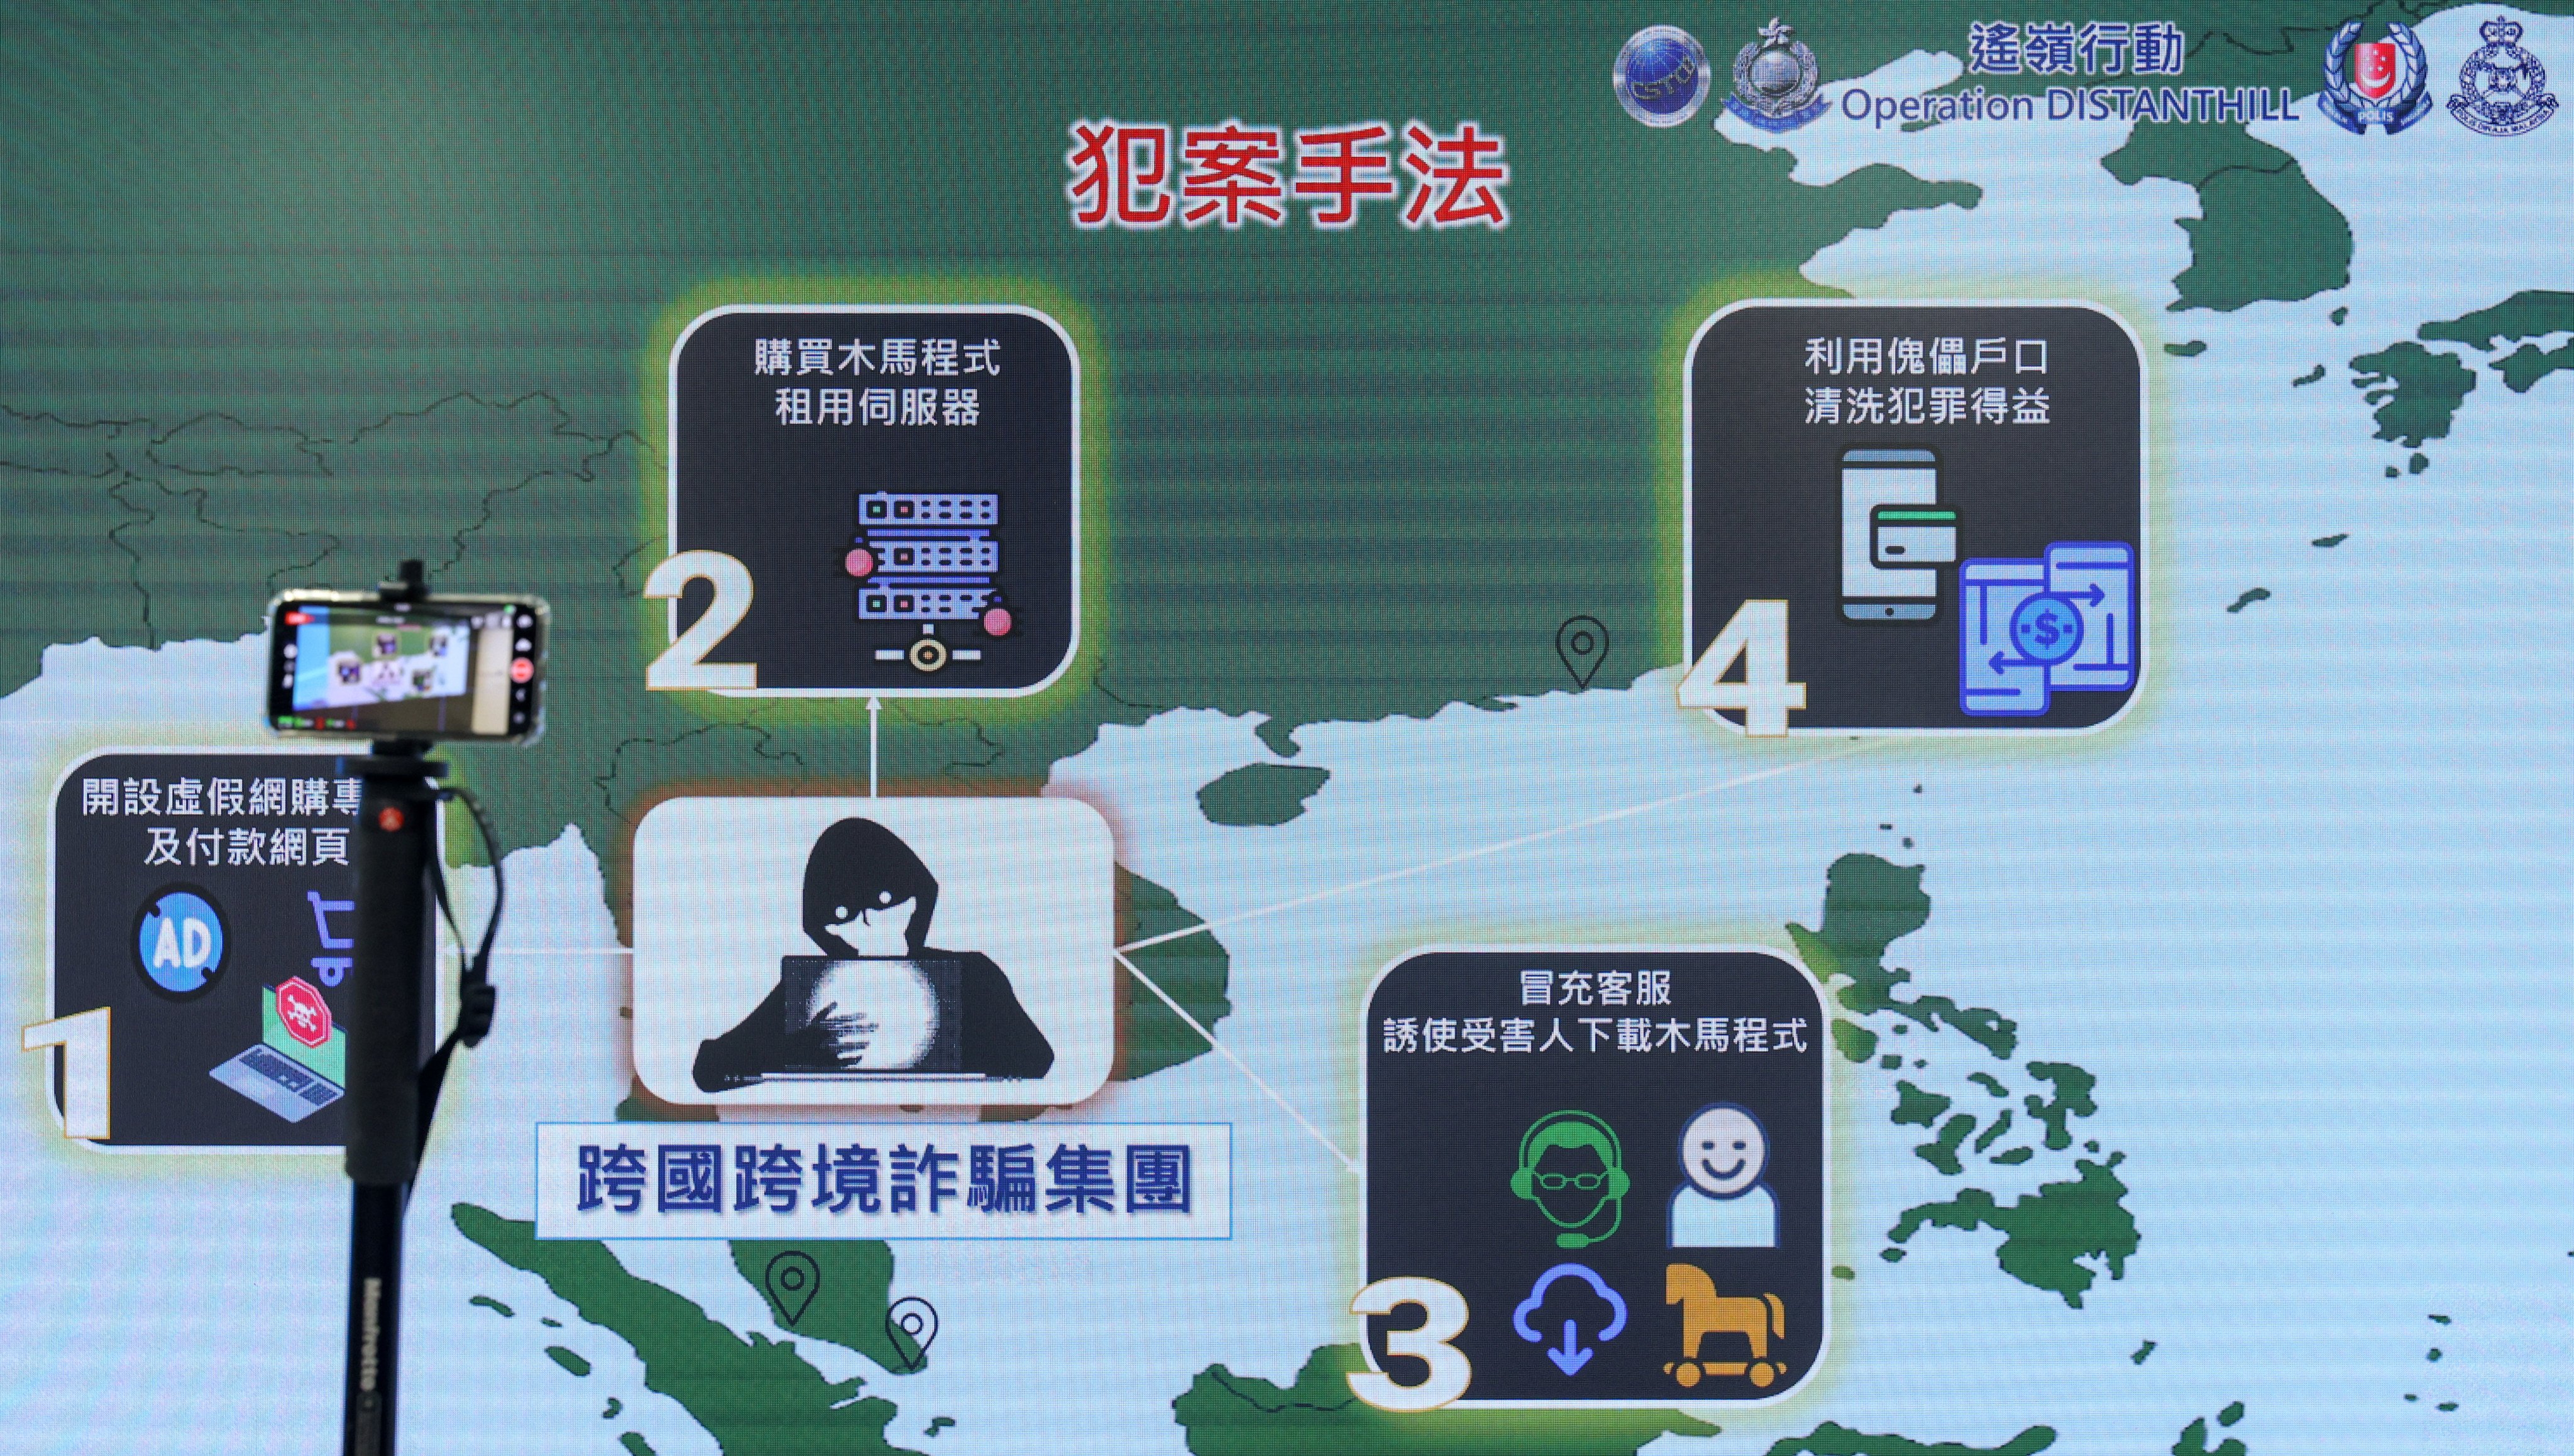 Hong Kong police display a map infographic explaining the operations of a transnational crime syndicate engaged in fraud using mobile malware. Photo: Yik Yeung-man